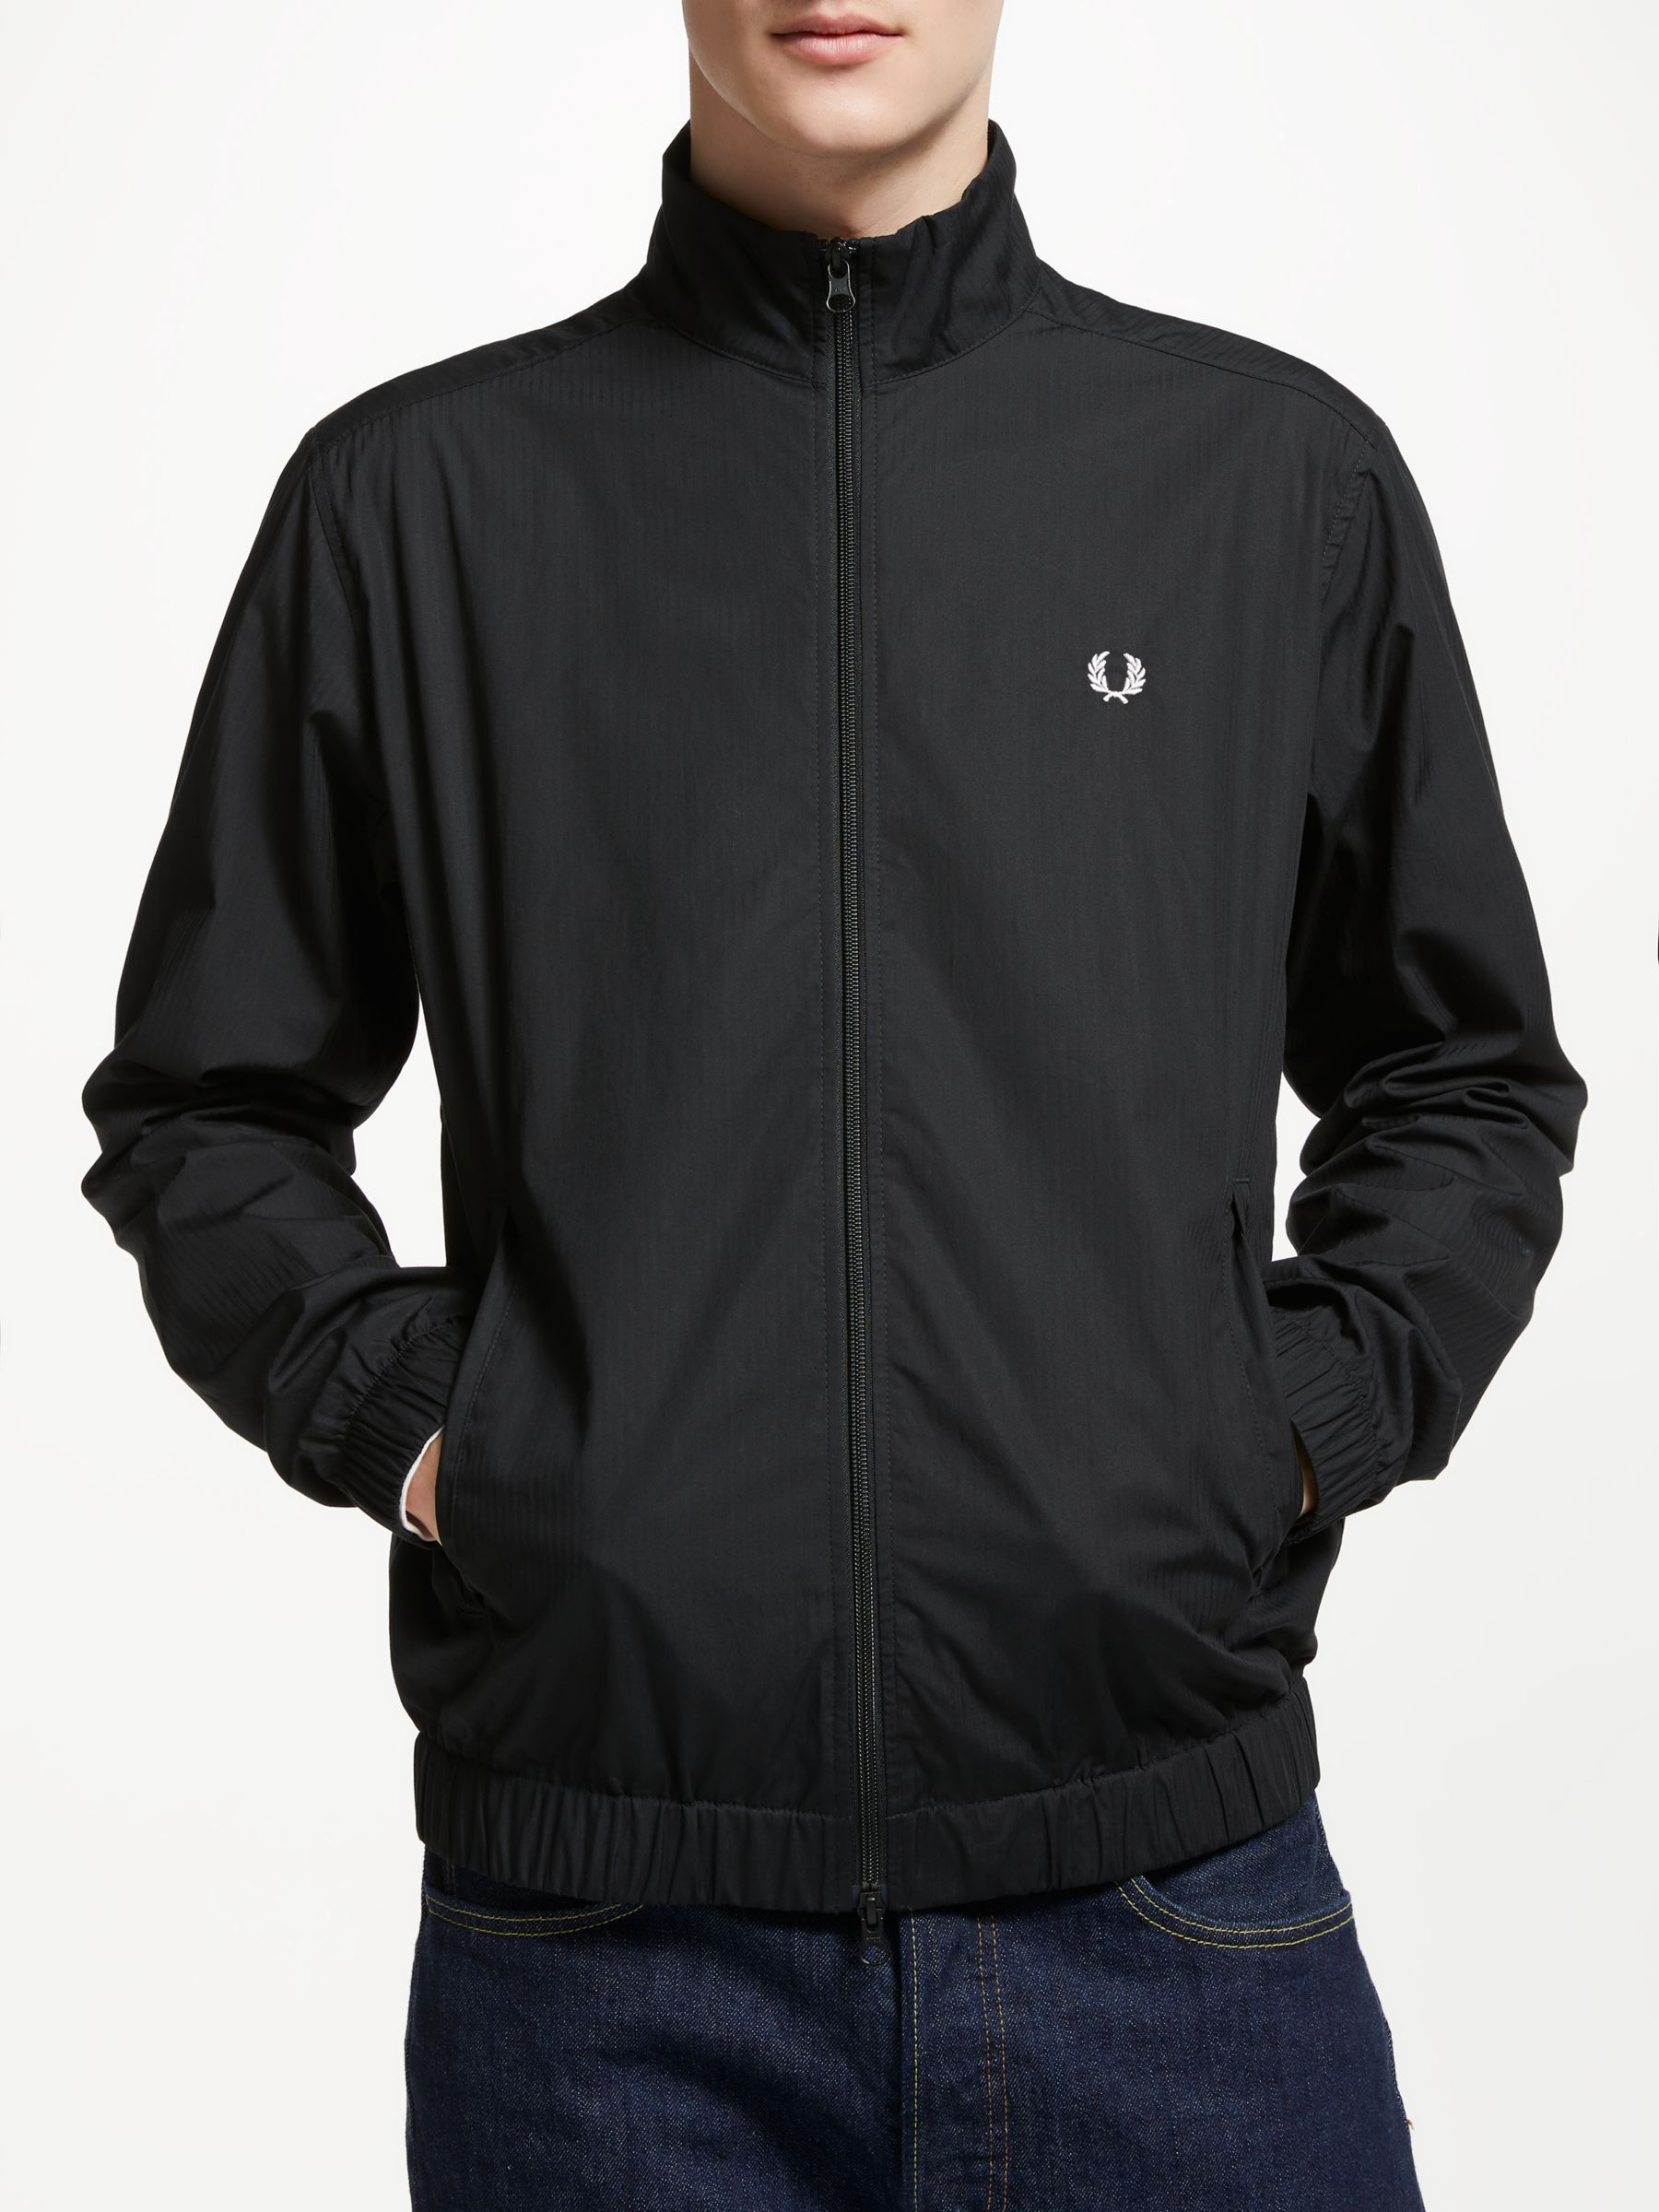 Fred Perry Lightweight Jacket, Black